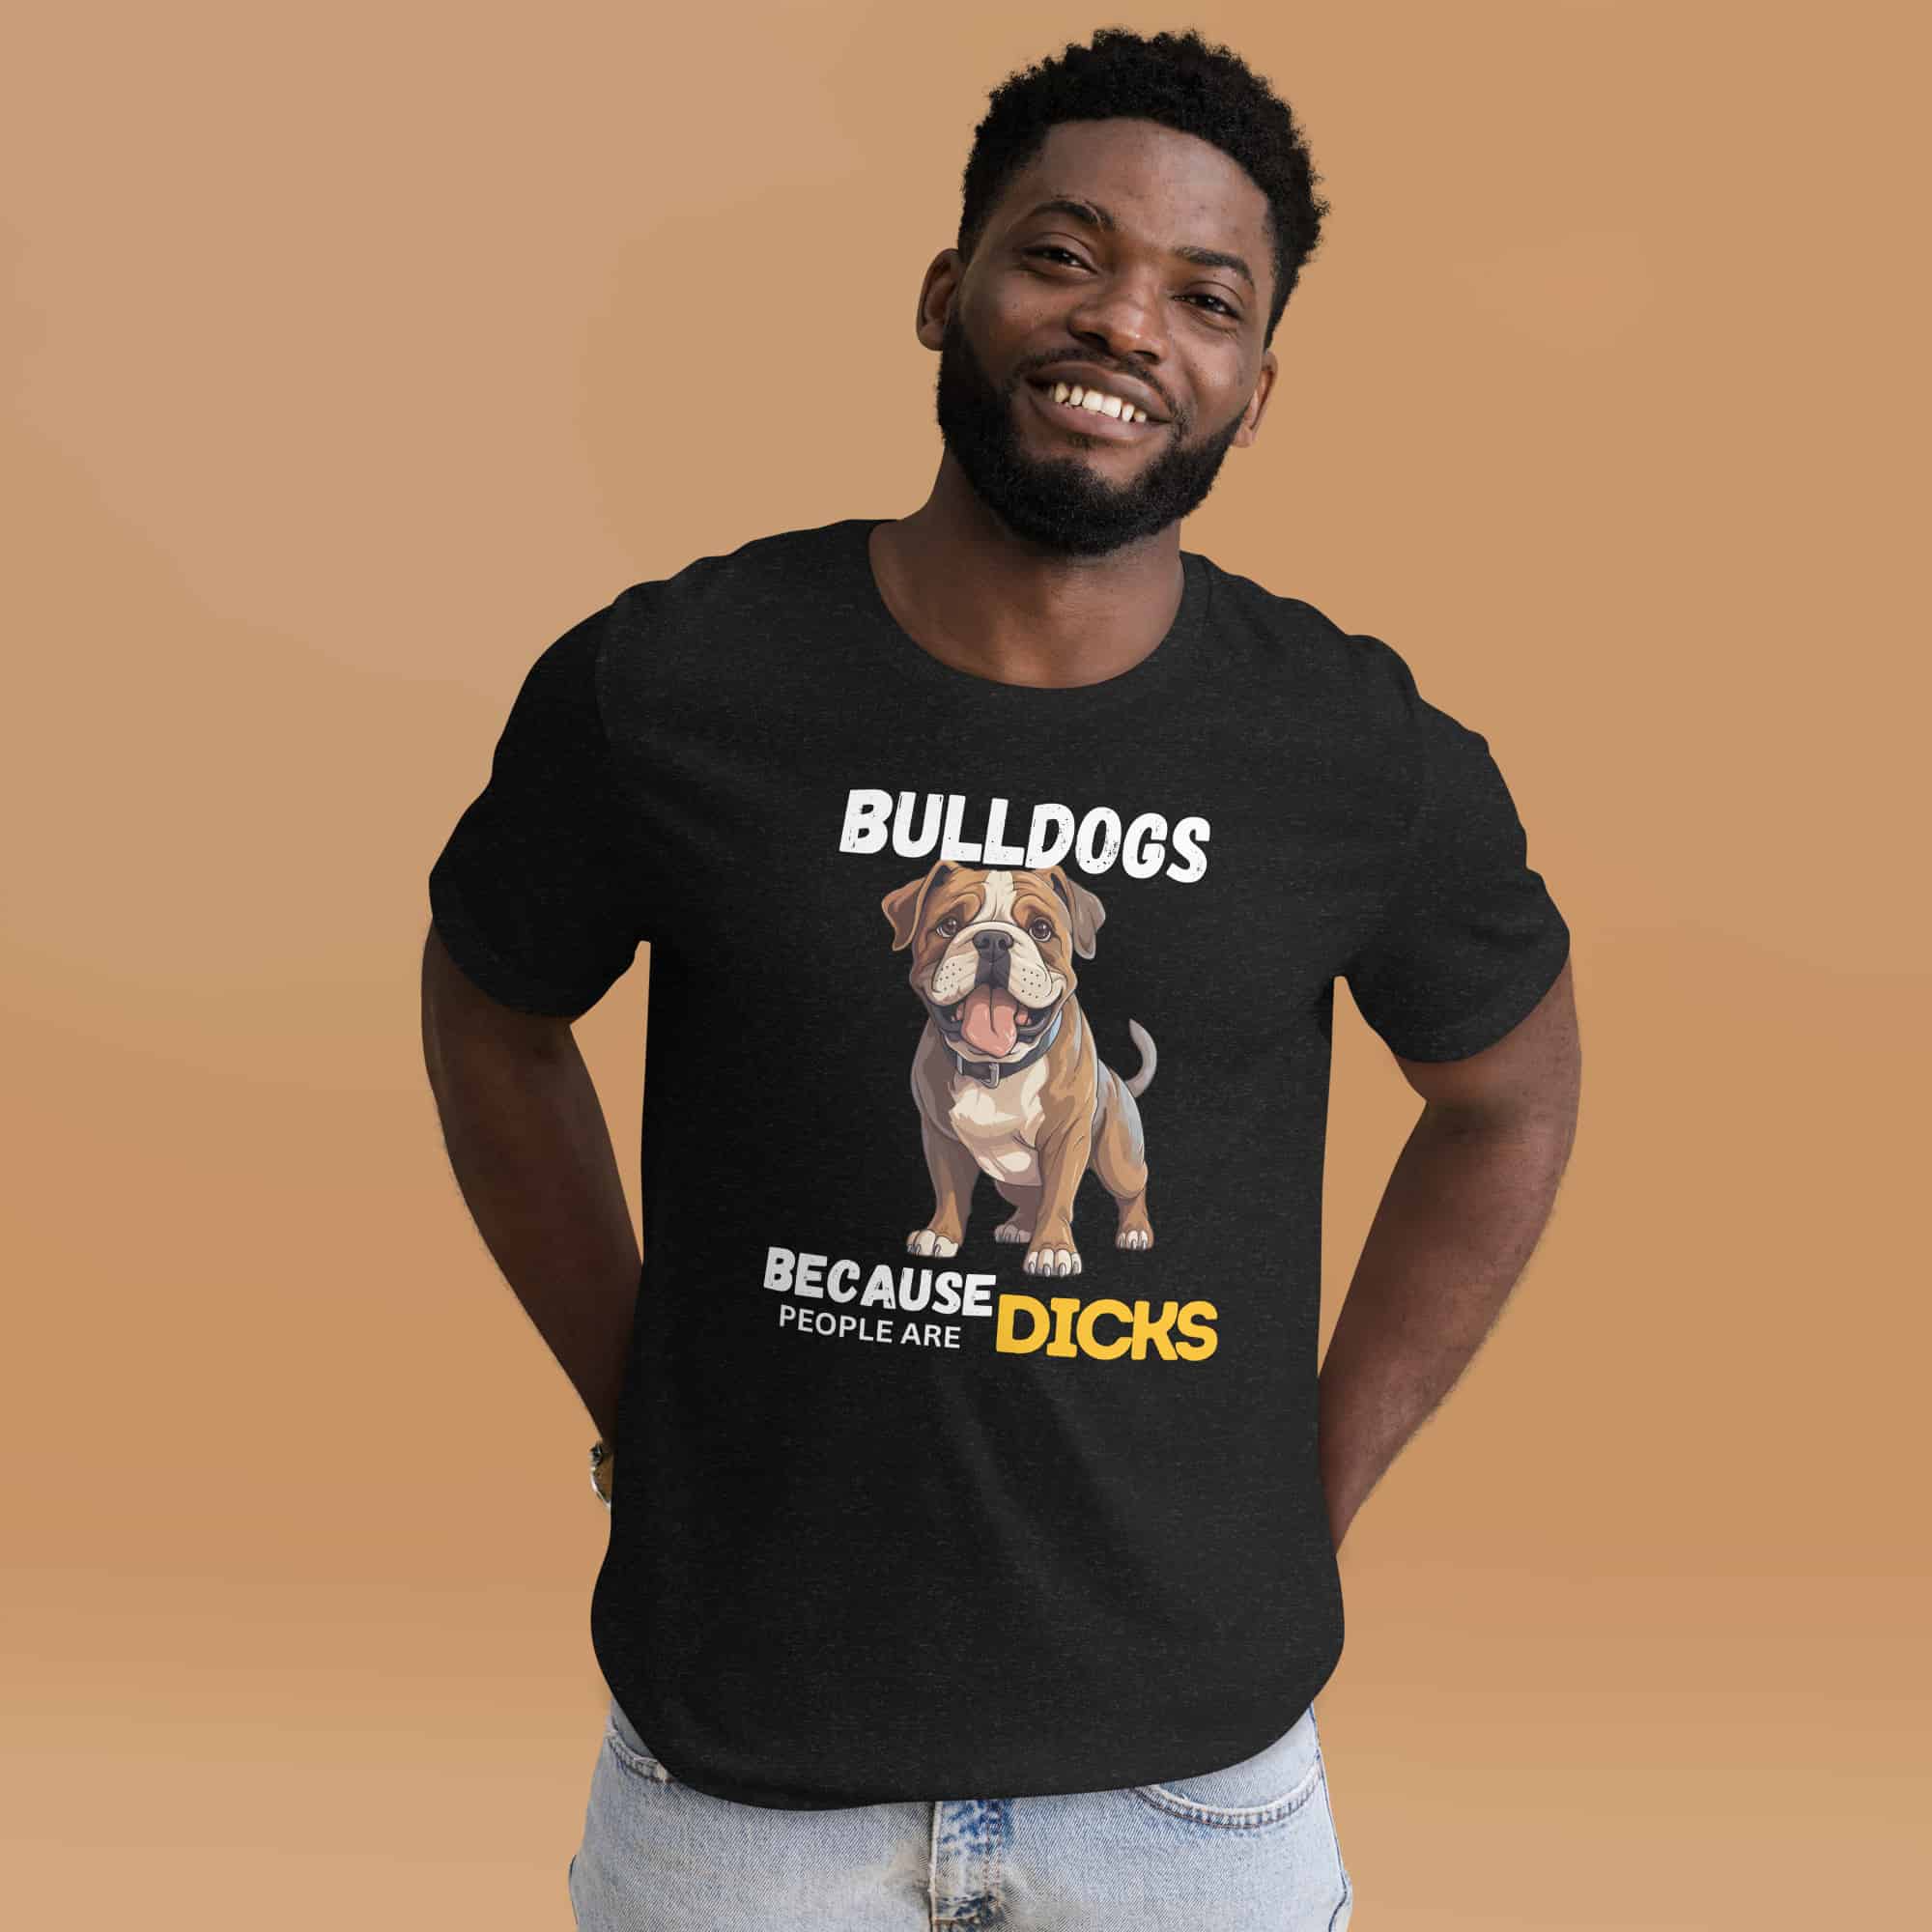 Bulldogs Because People Are Dicks Unisex T-Shirt male t